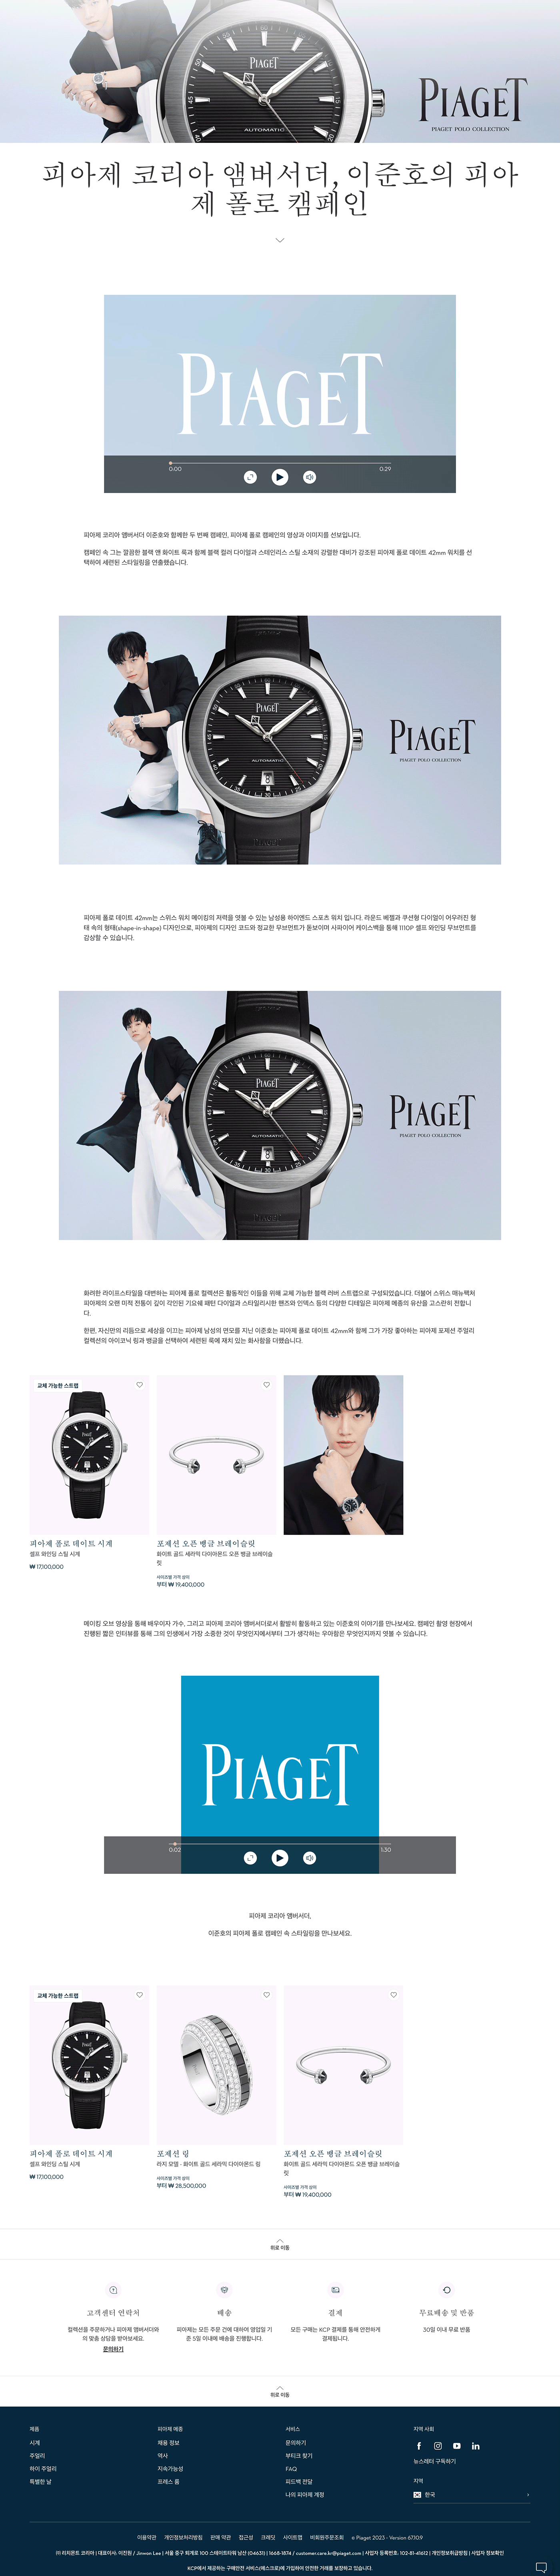 Film   video Editing  cinematography videography Photography  Fashion  piaget Watches